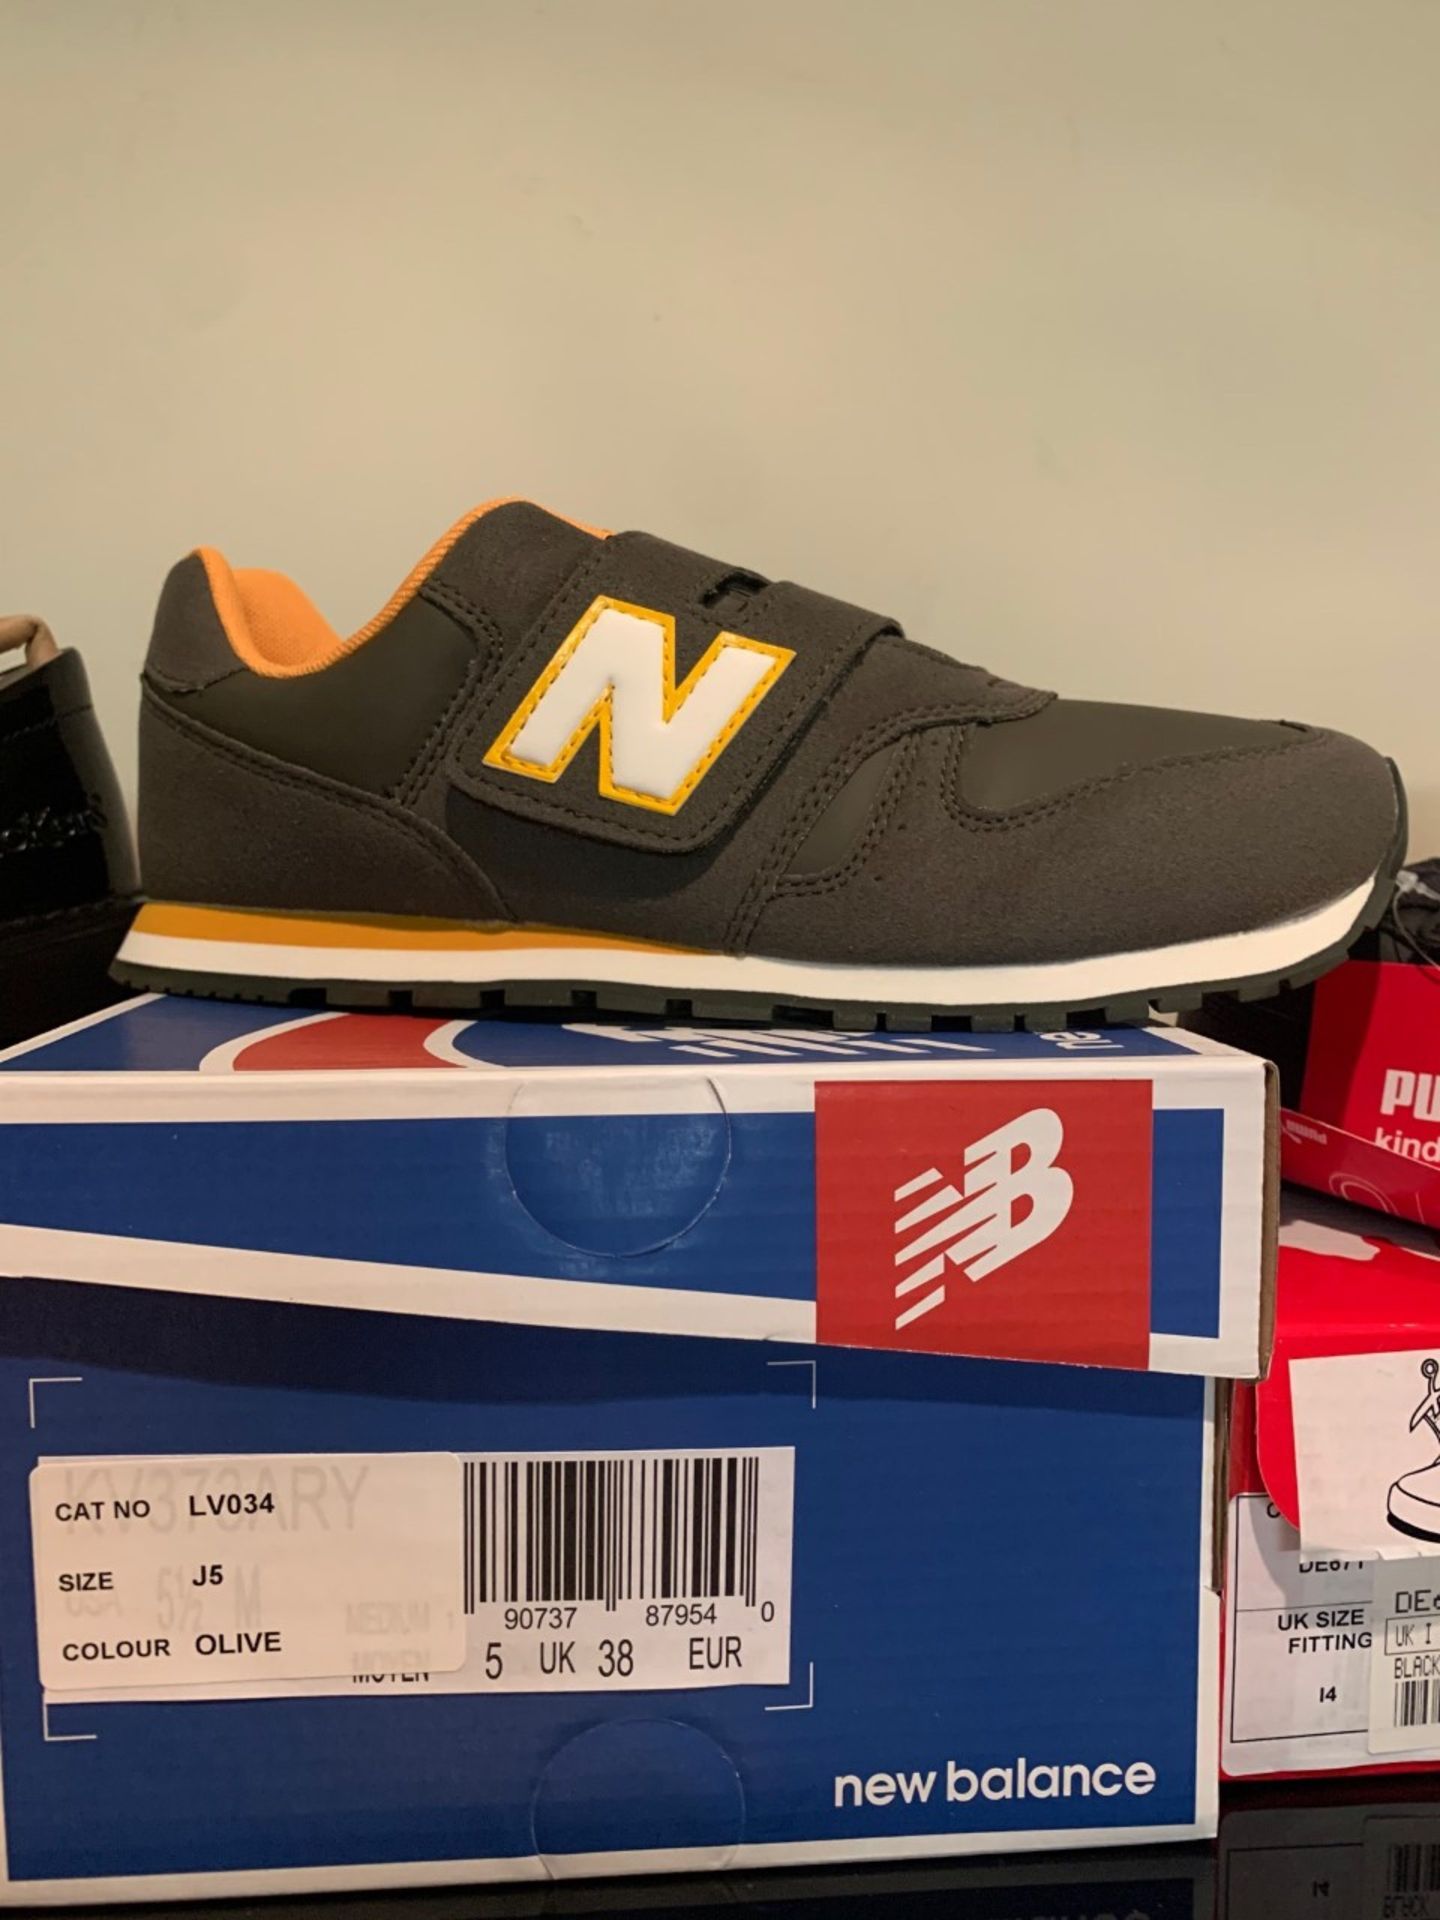 NEW & BOXED NEW BALANCE OLIVE TRAINER SIZE JUNIOR 5 (151/21)